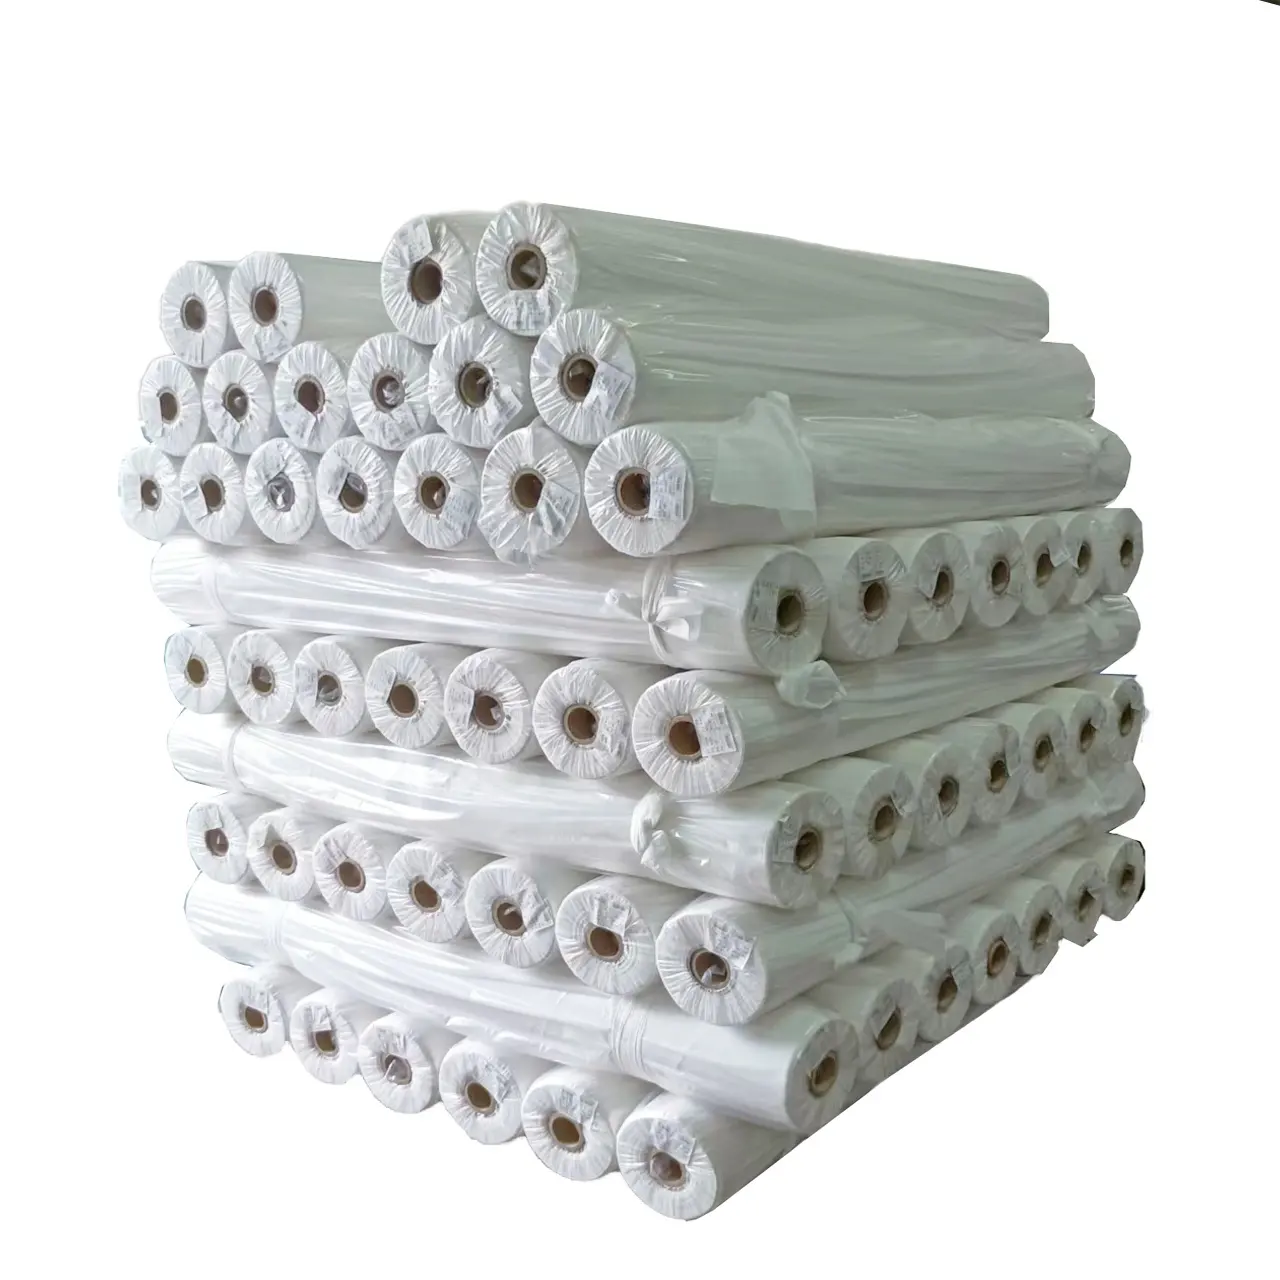 mattress cover mattress furniture cheap price non woven fabric for spring packing.spun bonded shopping bag nonwoven raw material